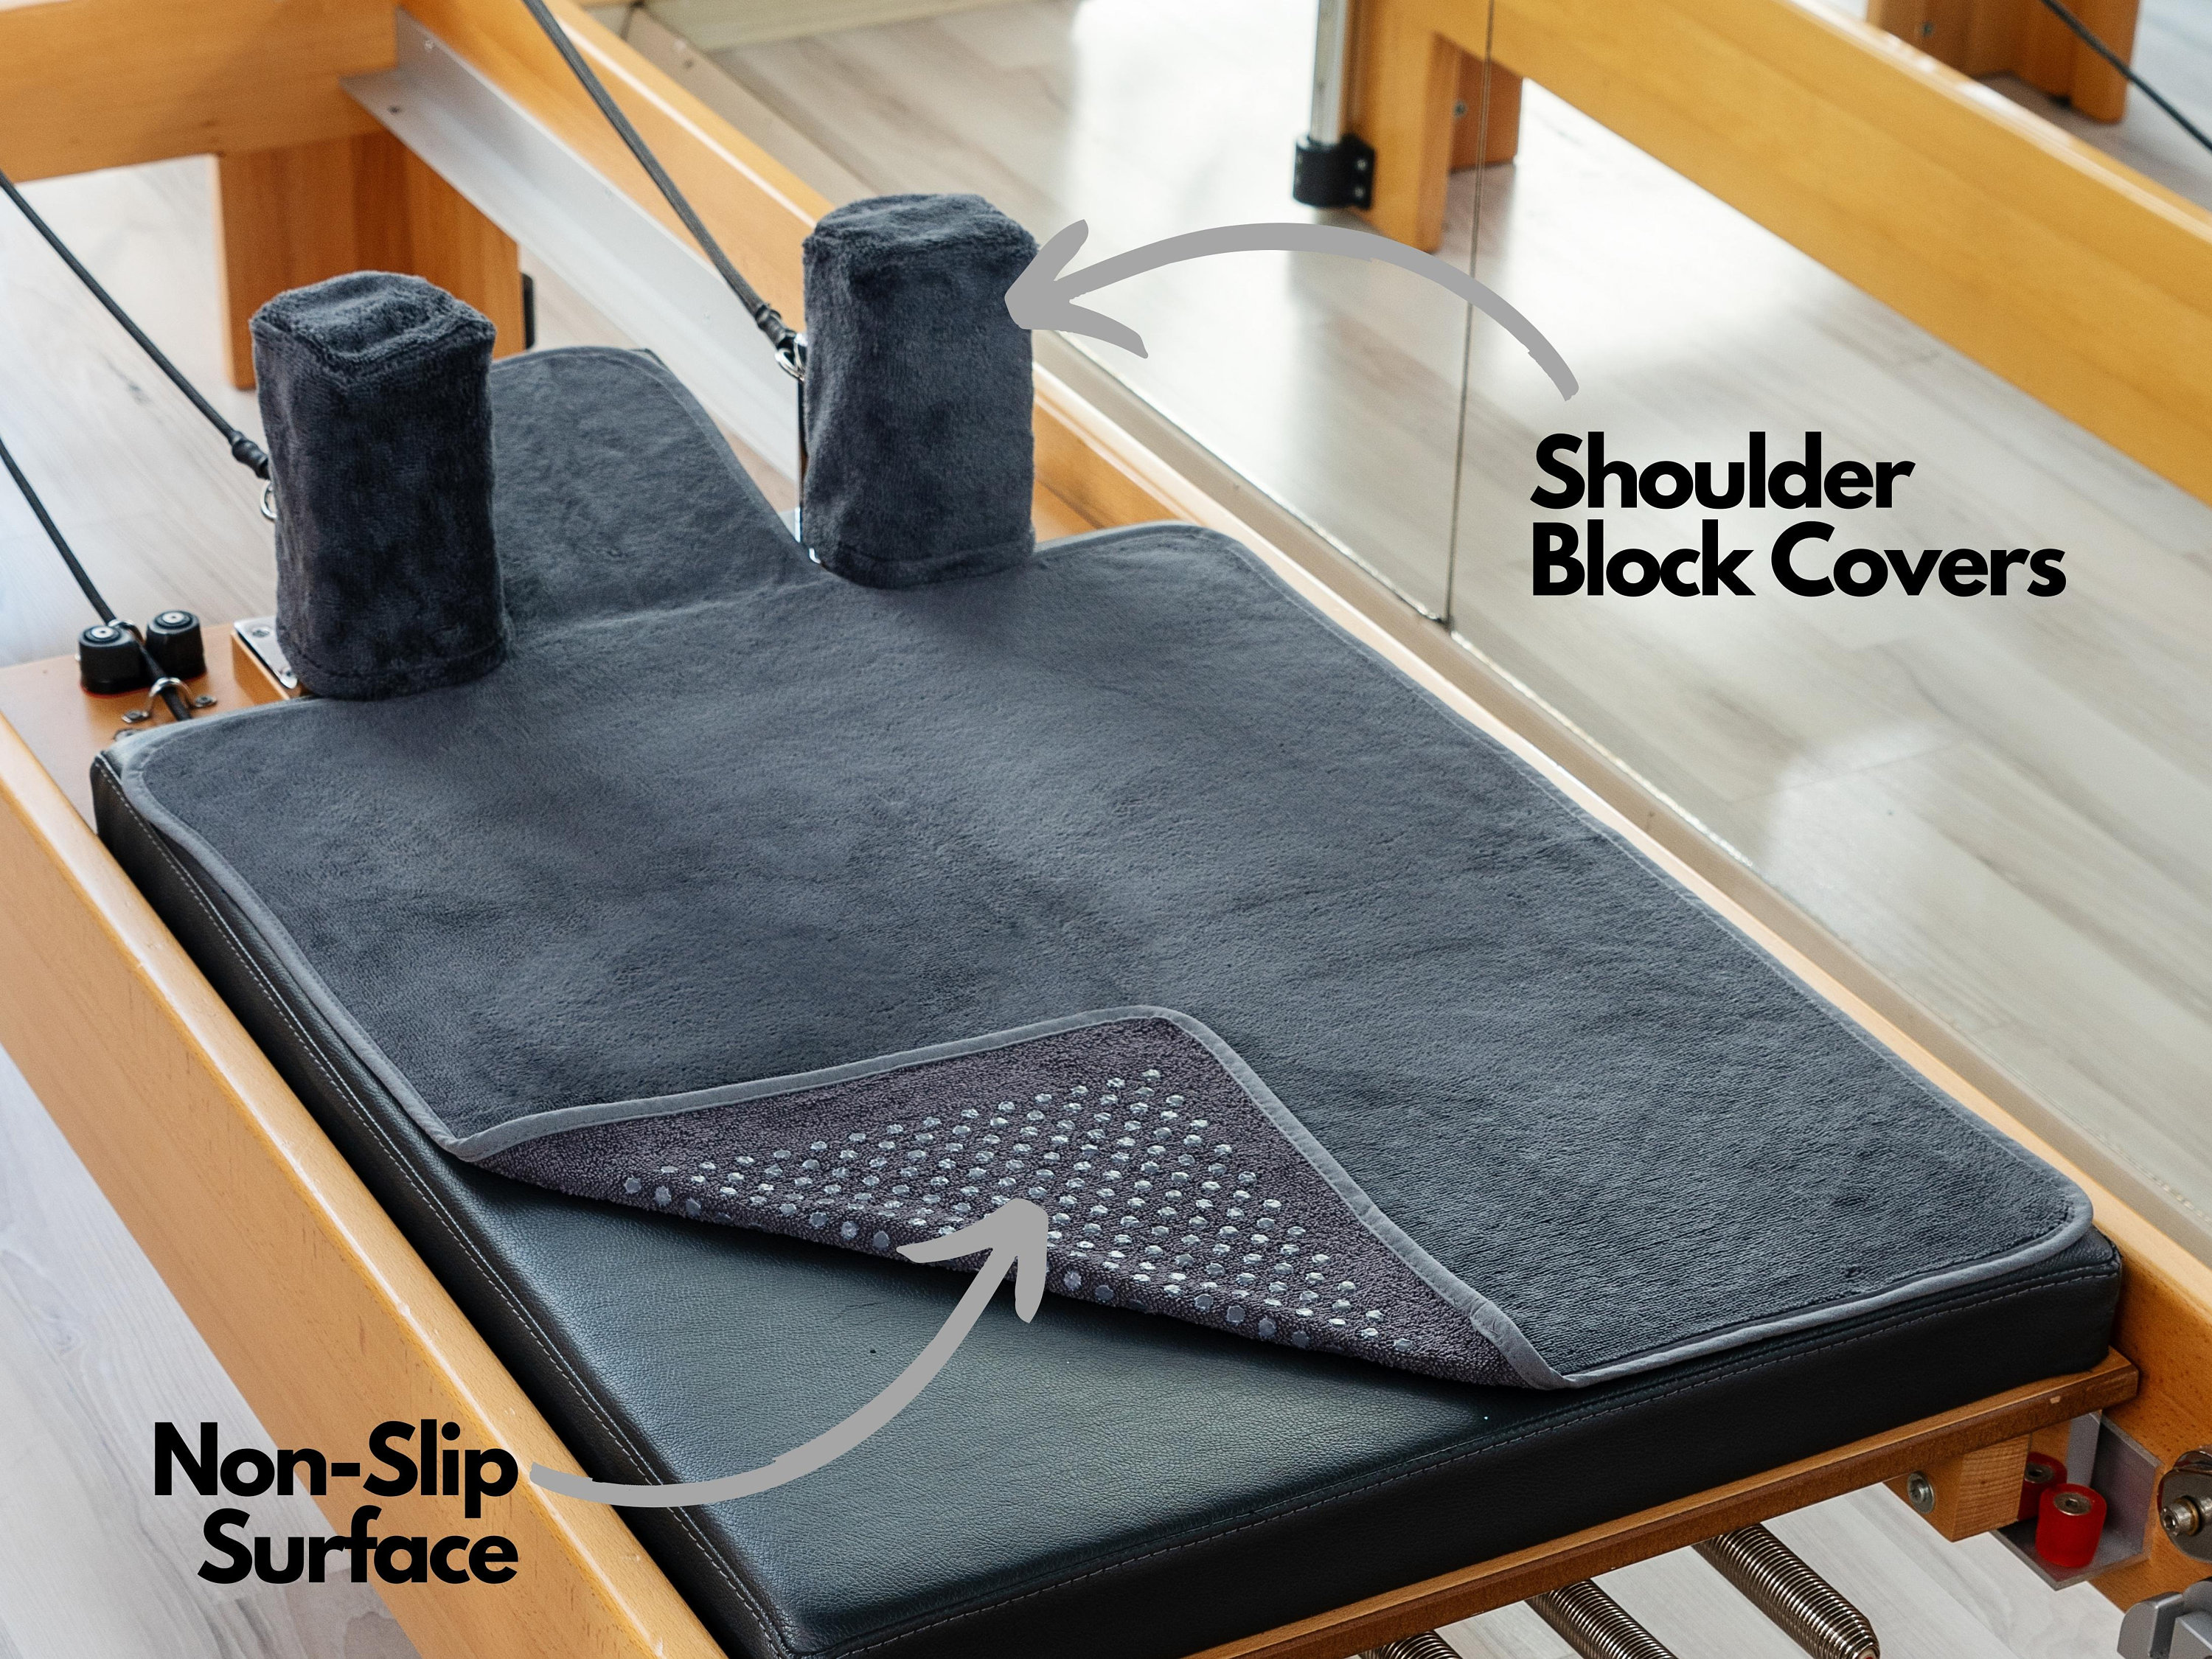 Pilates Reformer Non-slip Mat Towel With Shoulder Blocks Cover, Pilates  Accessories, Gifts 